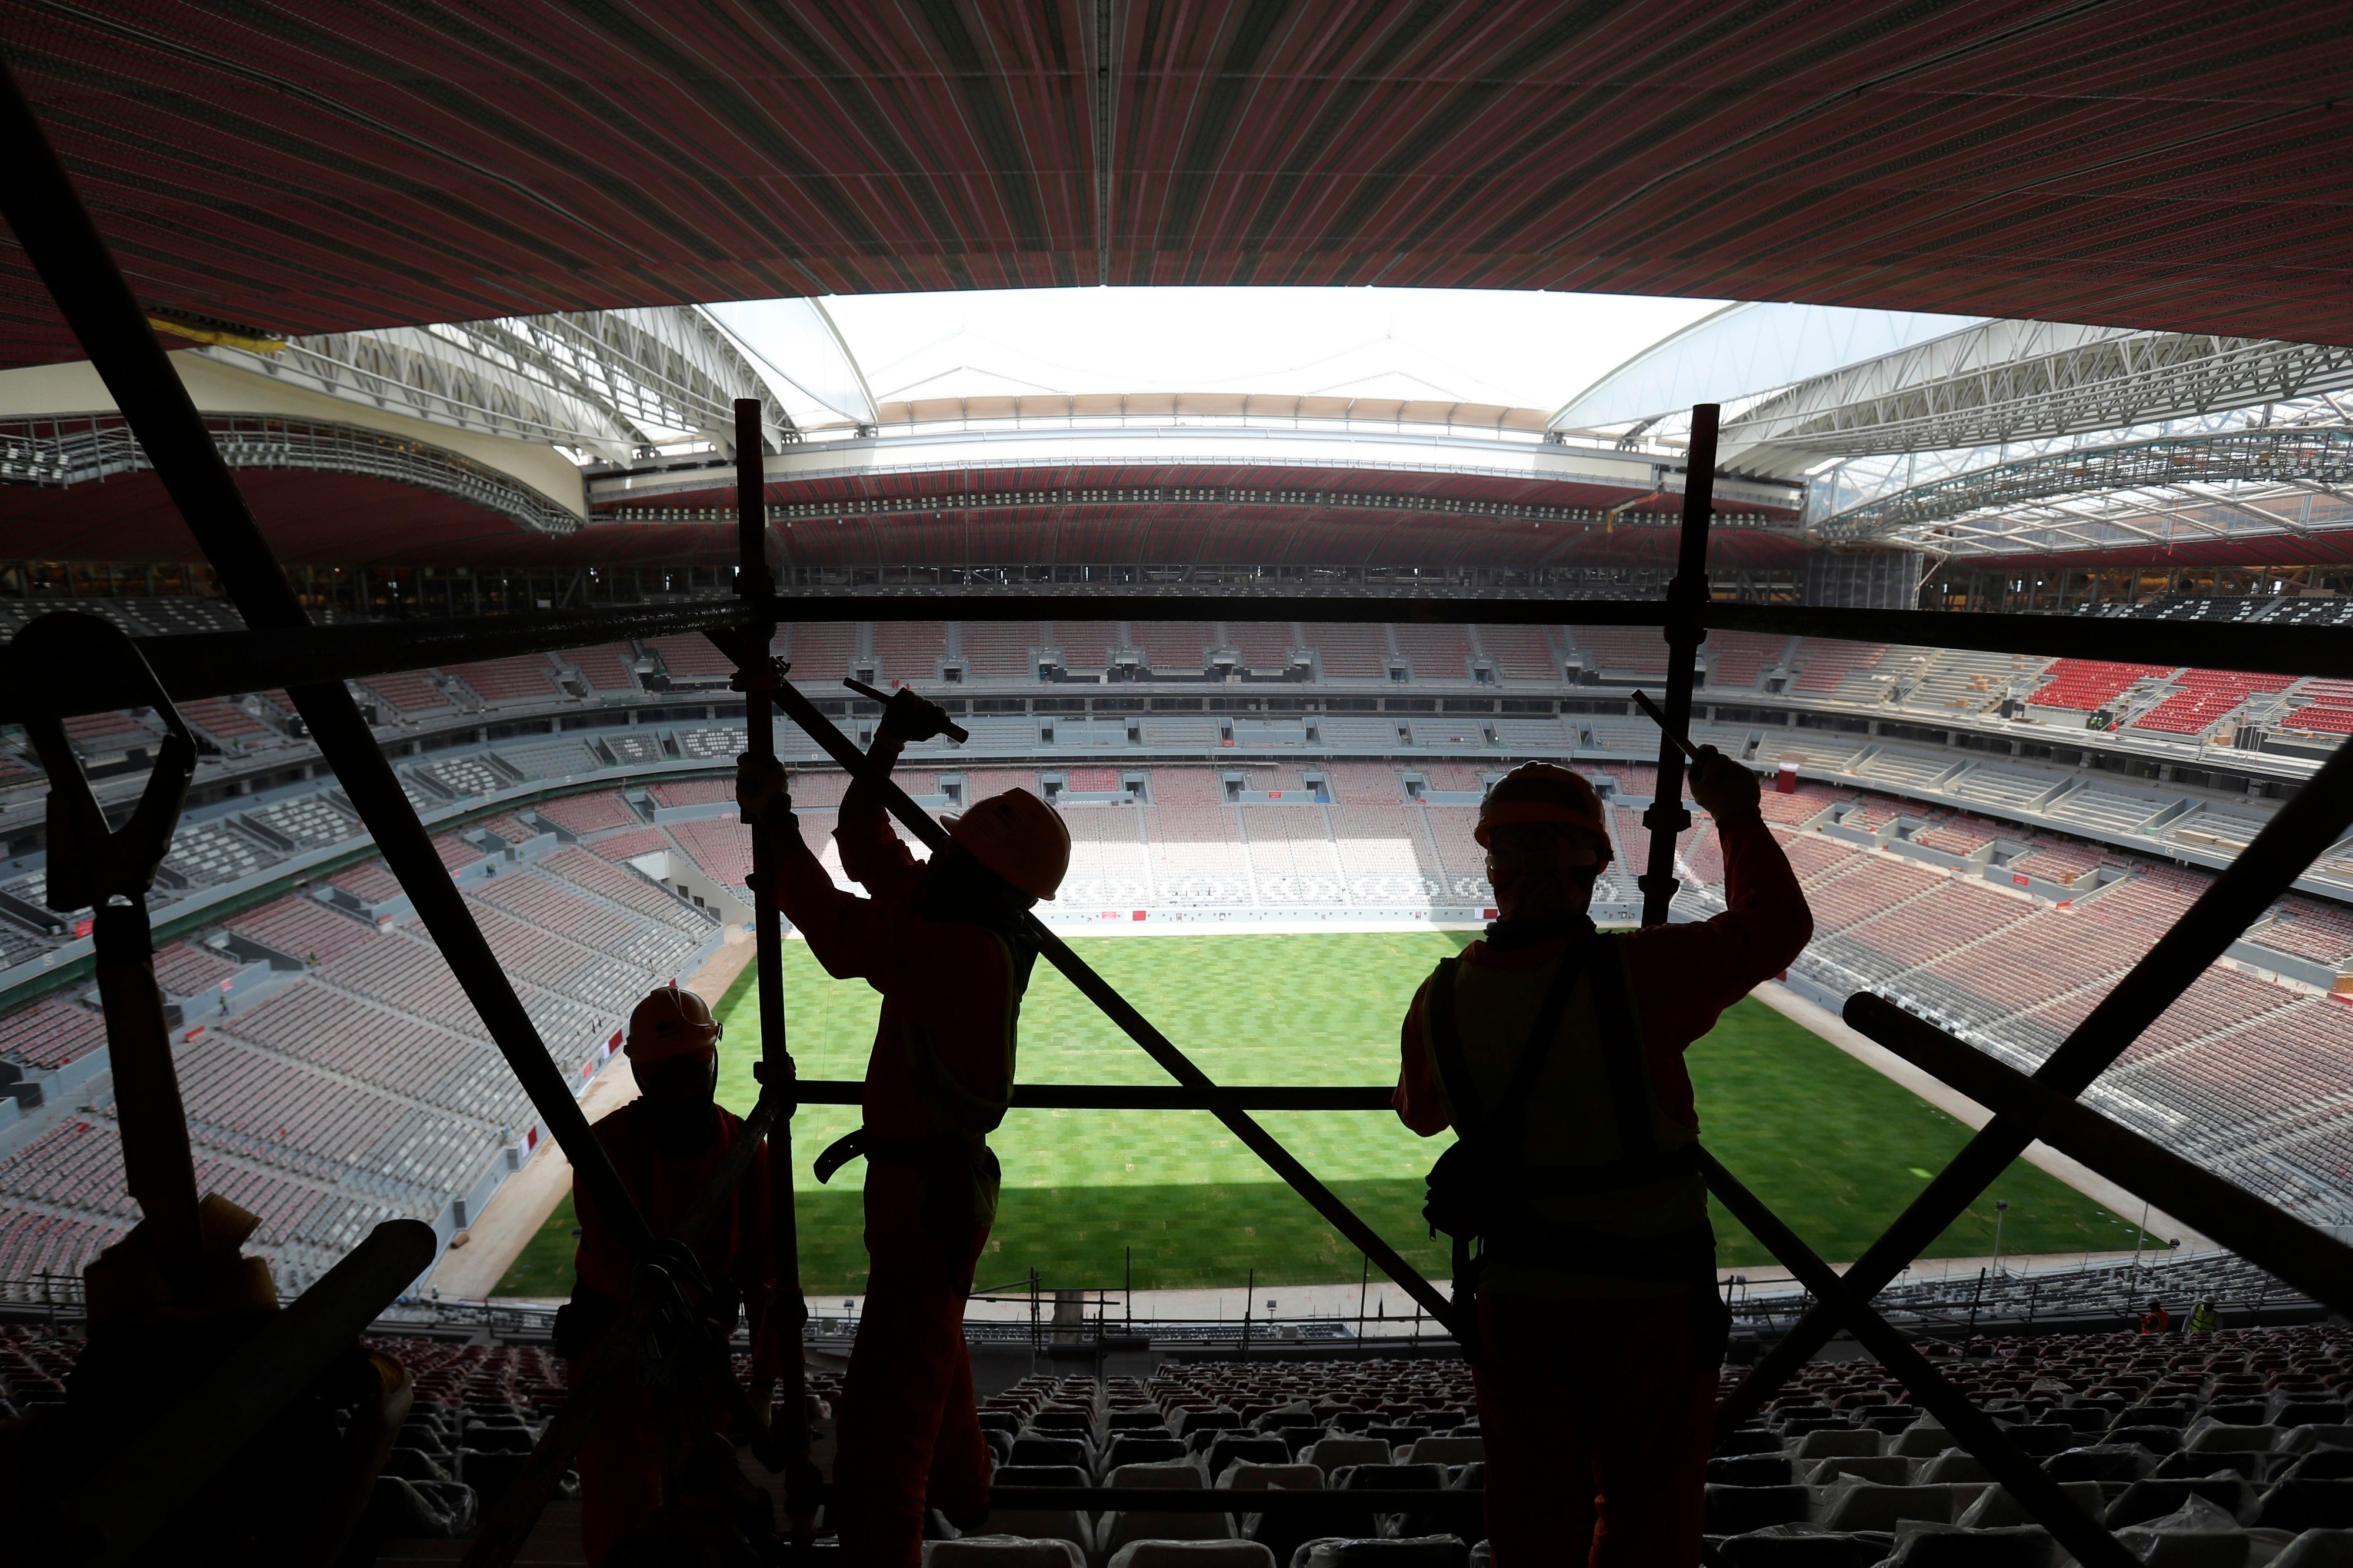 Labourers remove scaffolding at the Al Bayt stadium in Al Khor, Qatar. Migrant labourers who built Qatar’s World Cup stadiums often worked long hours under harsh conditions and were subjected to discrimination, wage theft and other abuses as their employers evaded accountability. Photo: AP